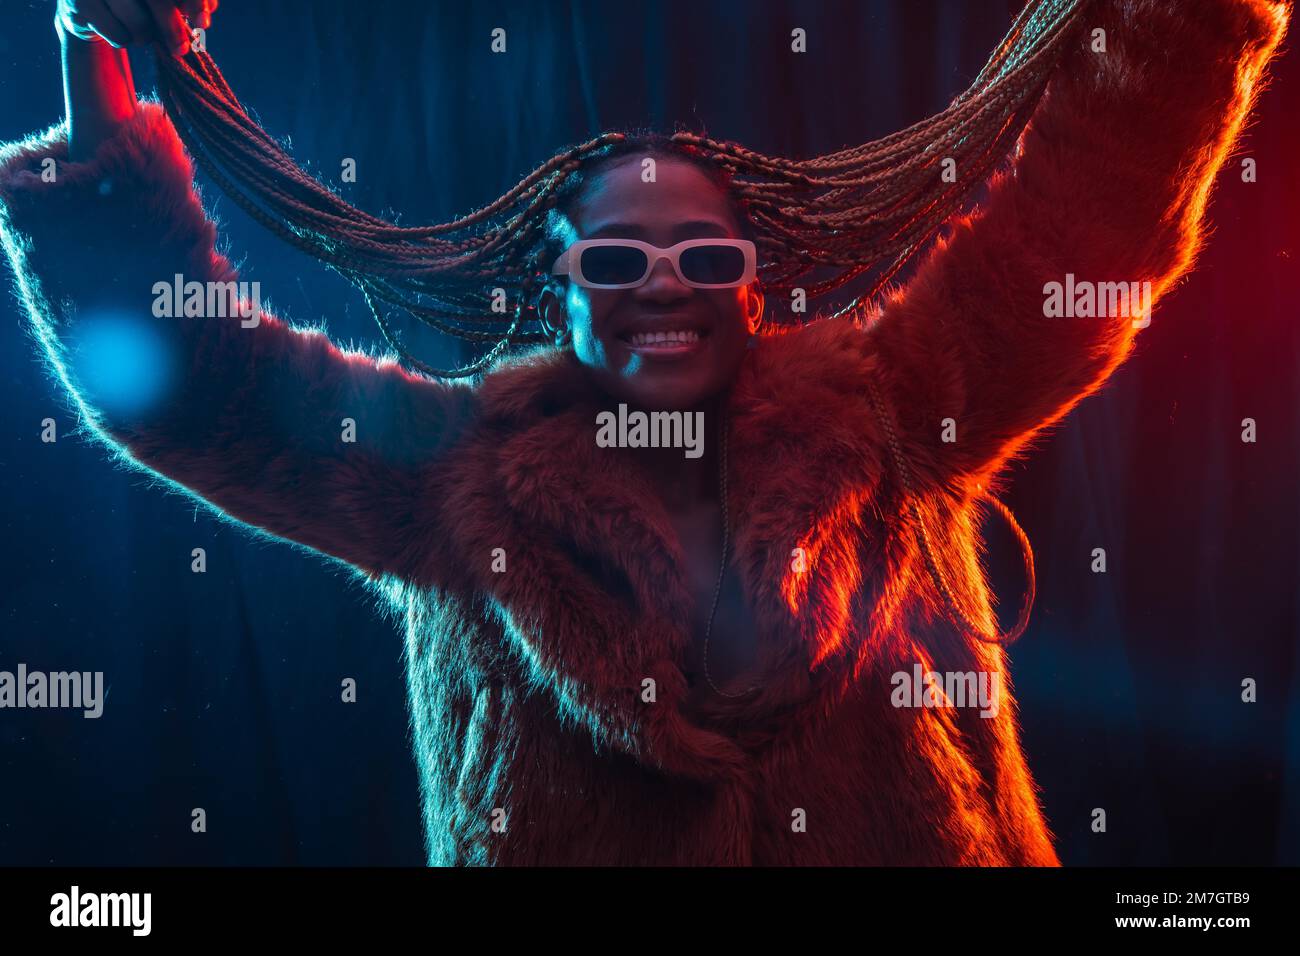 Black ethnic woman with braids with blue and red led lights, moving her hair while dancing Stock Photo